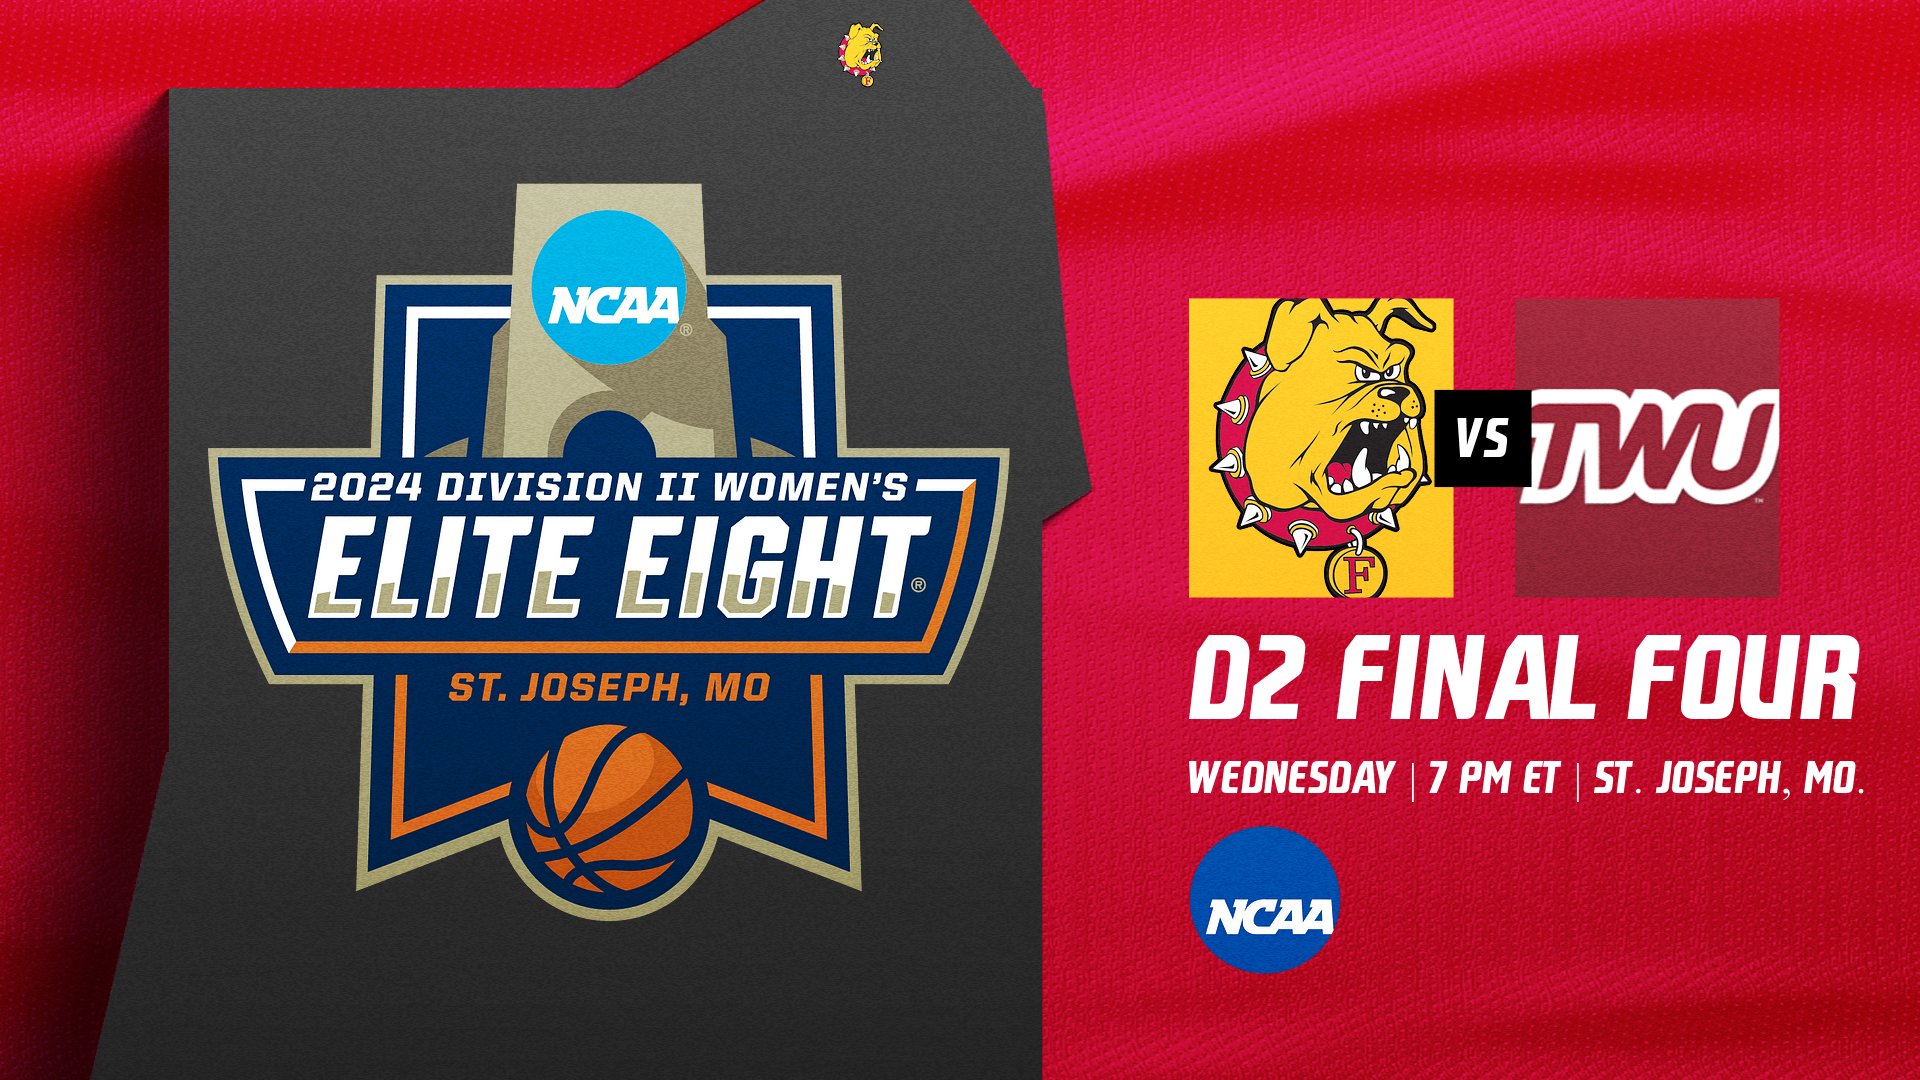 GAMEDAY COVERAGE! Ferris State Faces Texas Woman's University In NCAA D2 Semifinals